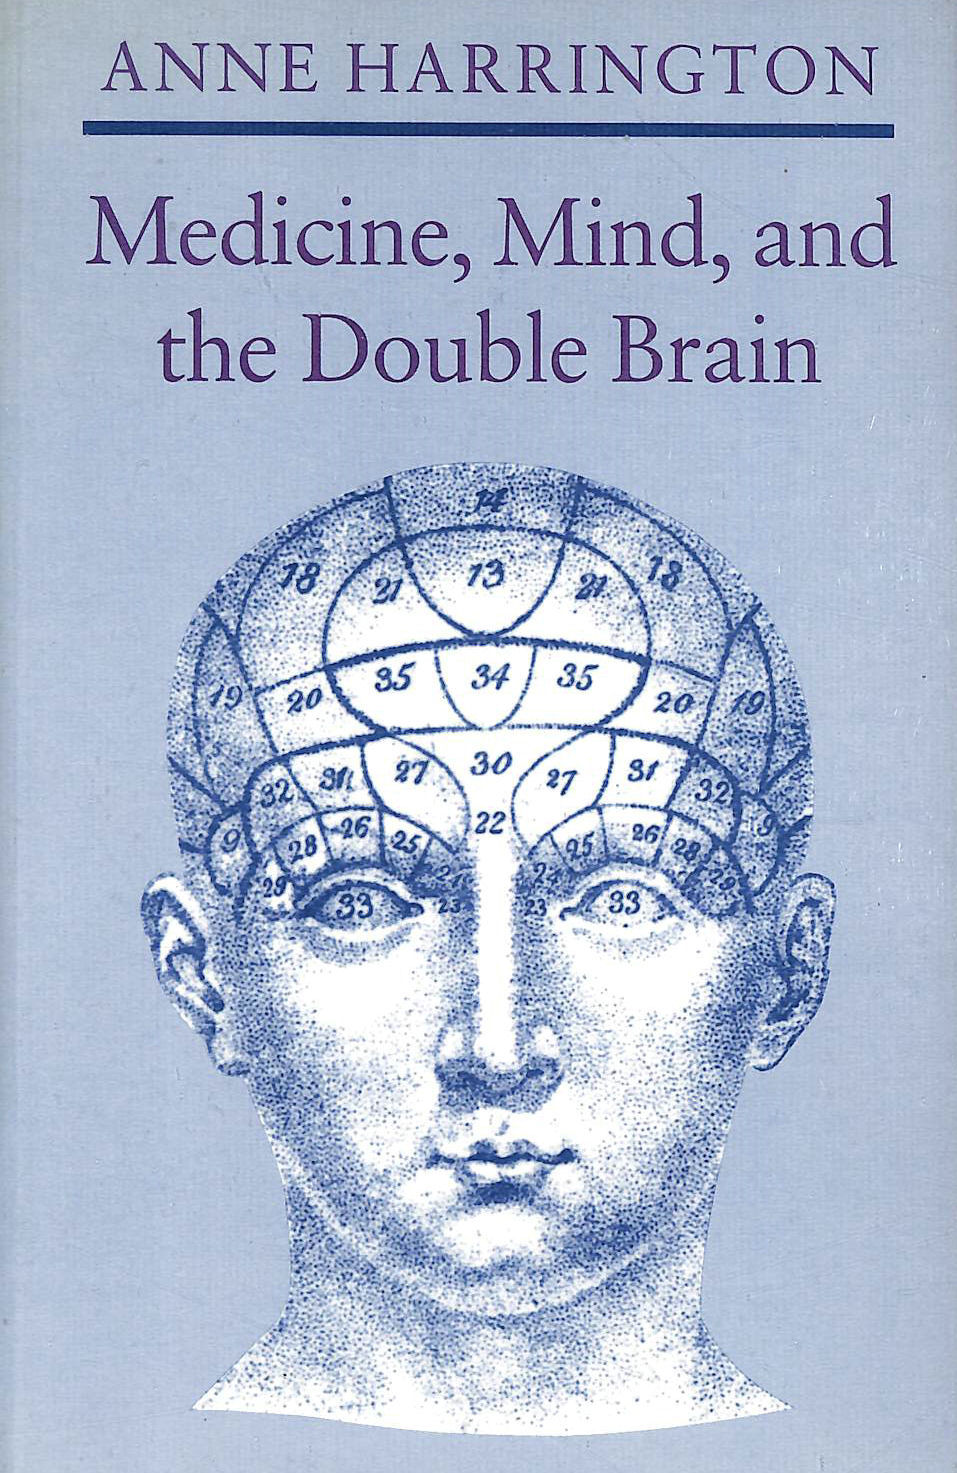 ANNE HARRINGTON - Medicine, Mind, and the Double Brain: A Study in Nineteenth-Century Thought